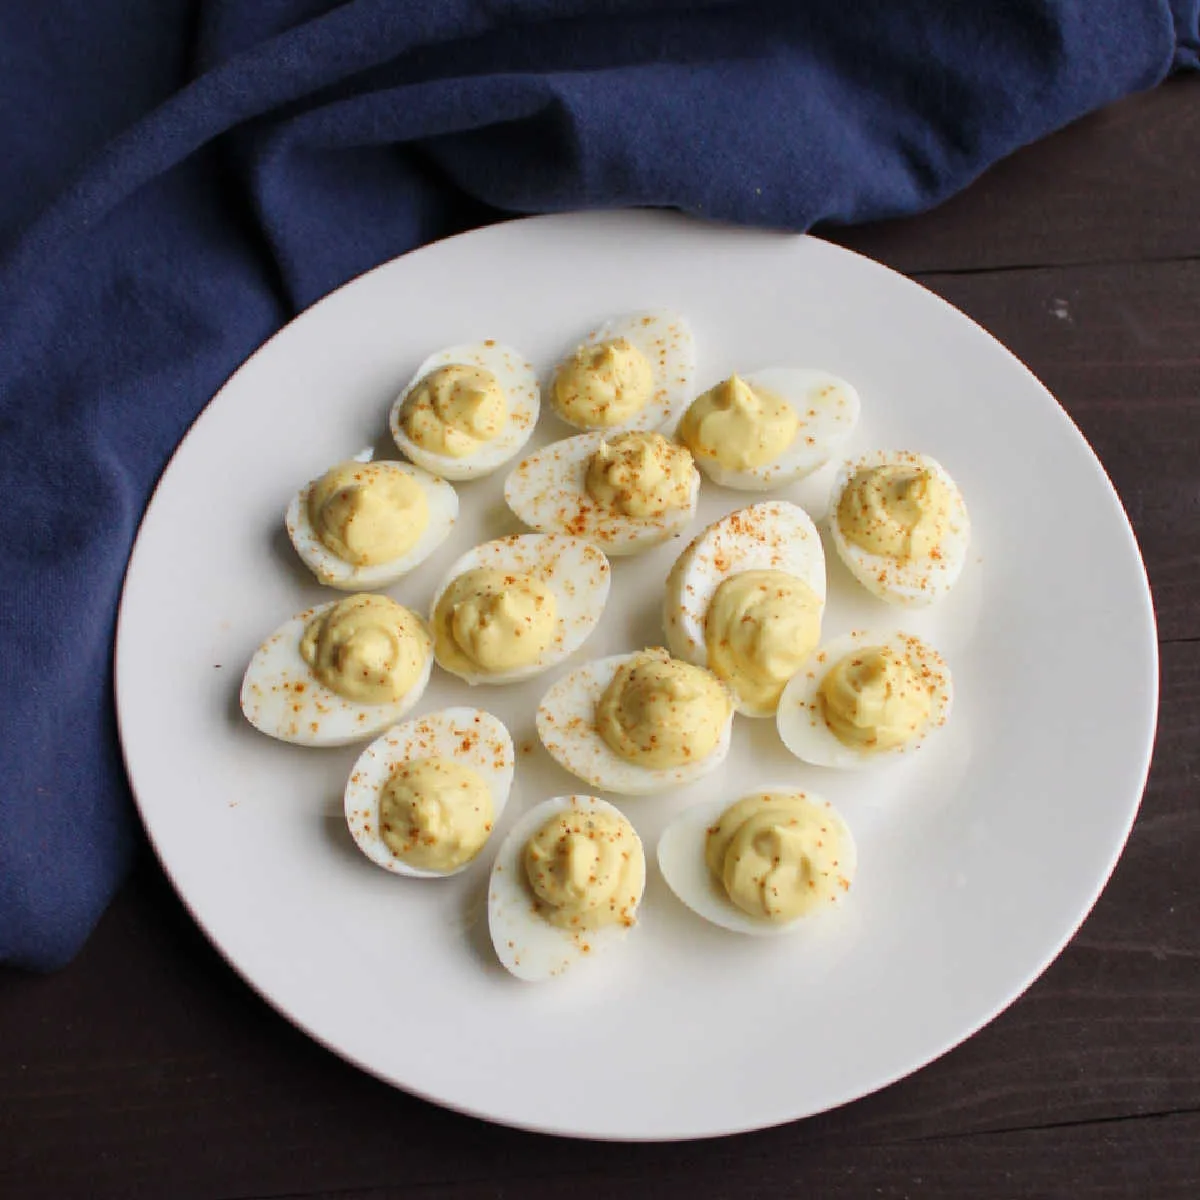 Plate filled with mini quail deviled eggs.